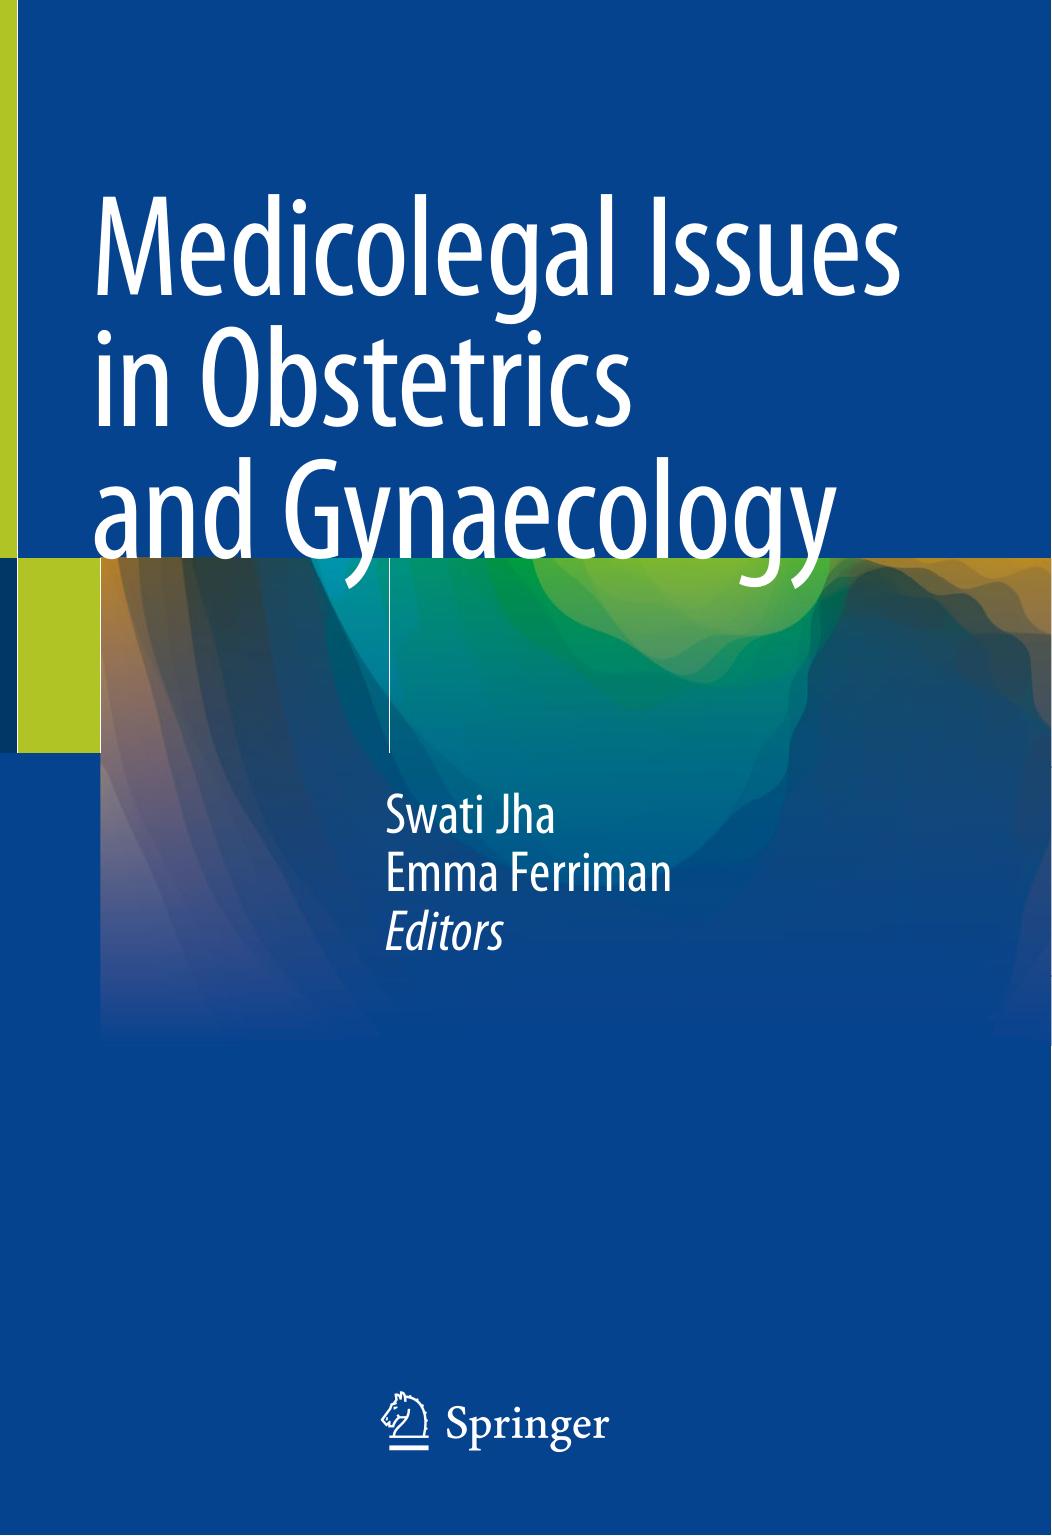 Medicolegal Issues in Obstetrics and Gynaecology 2018